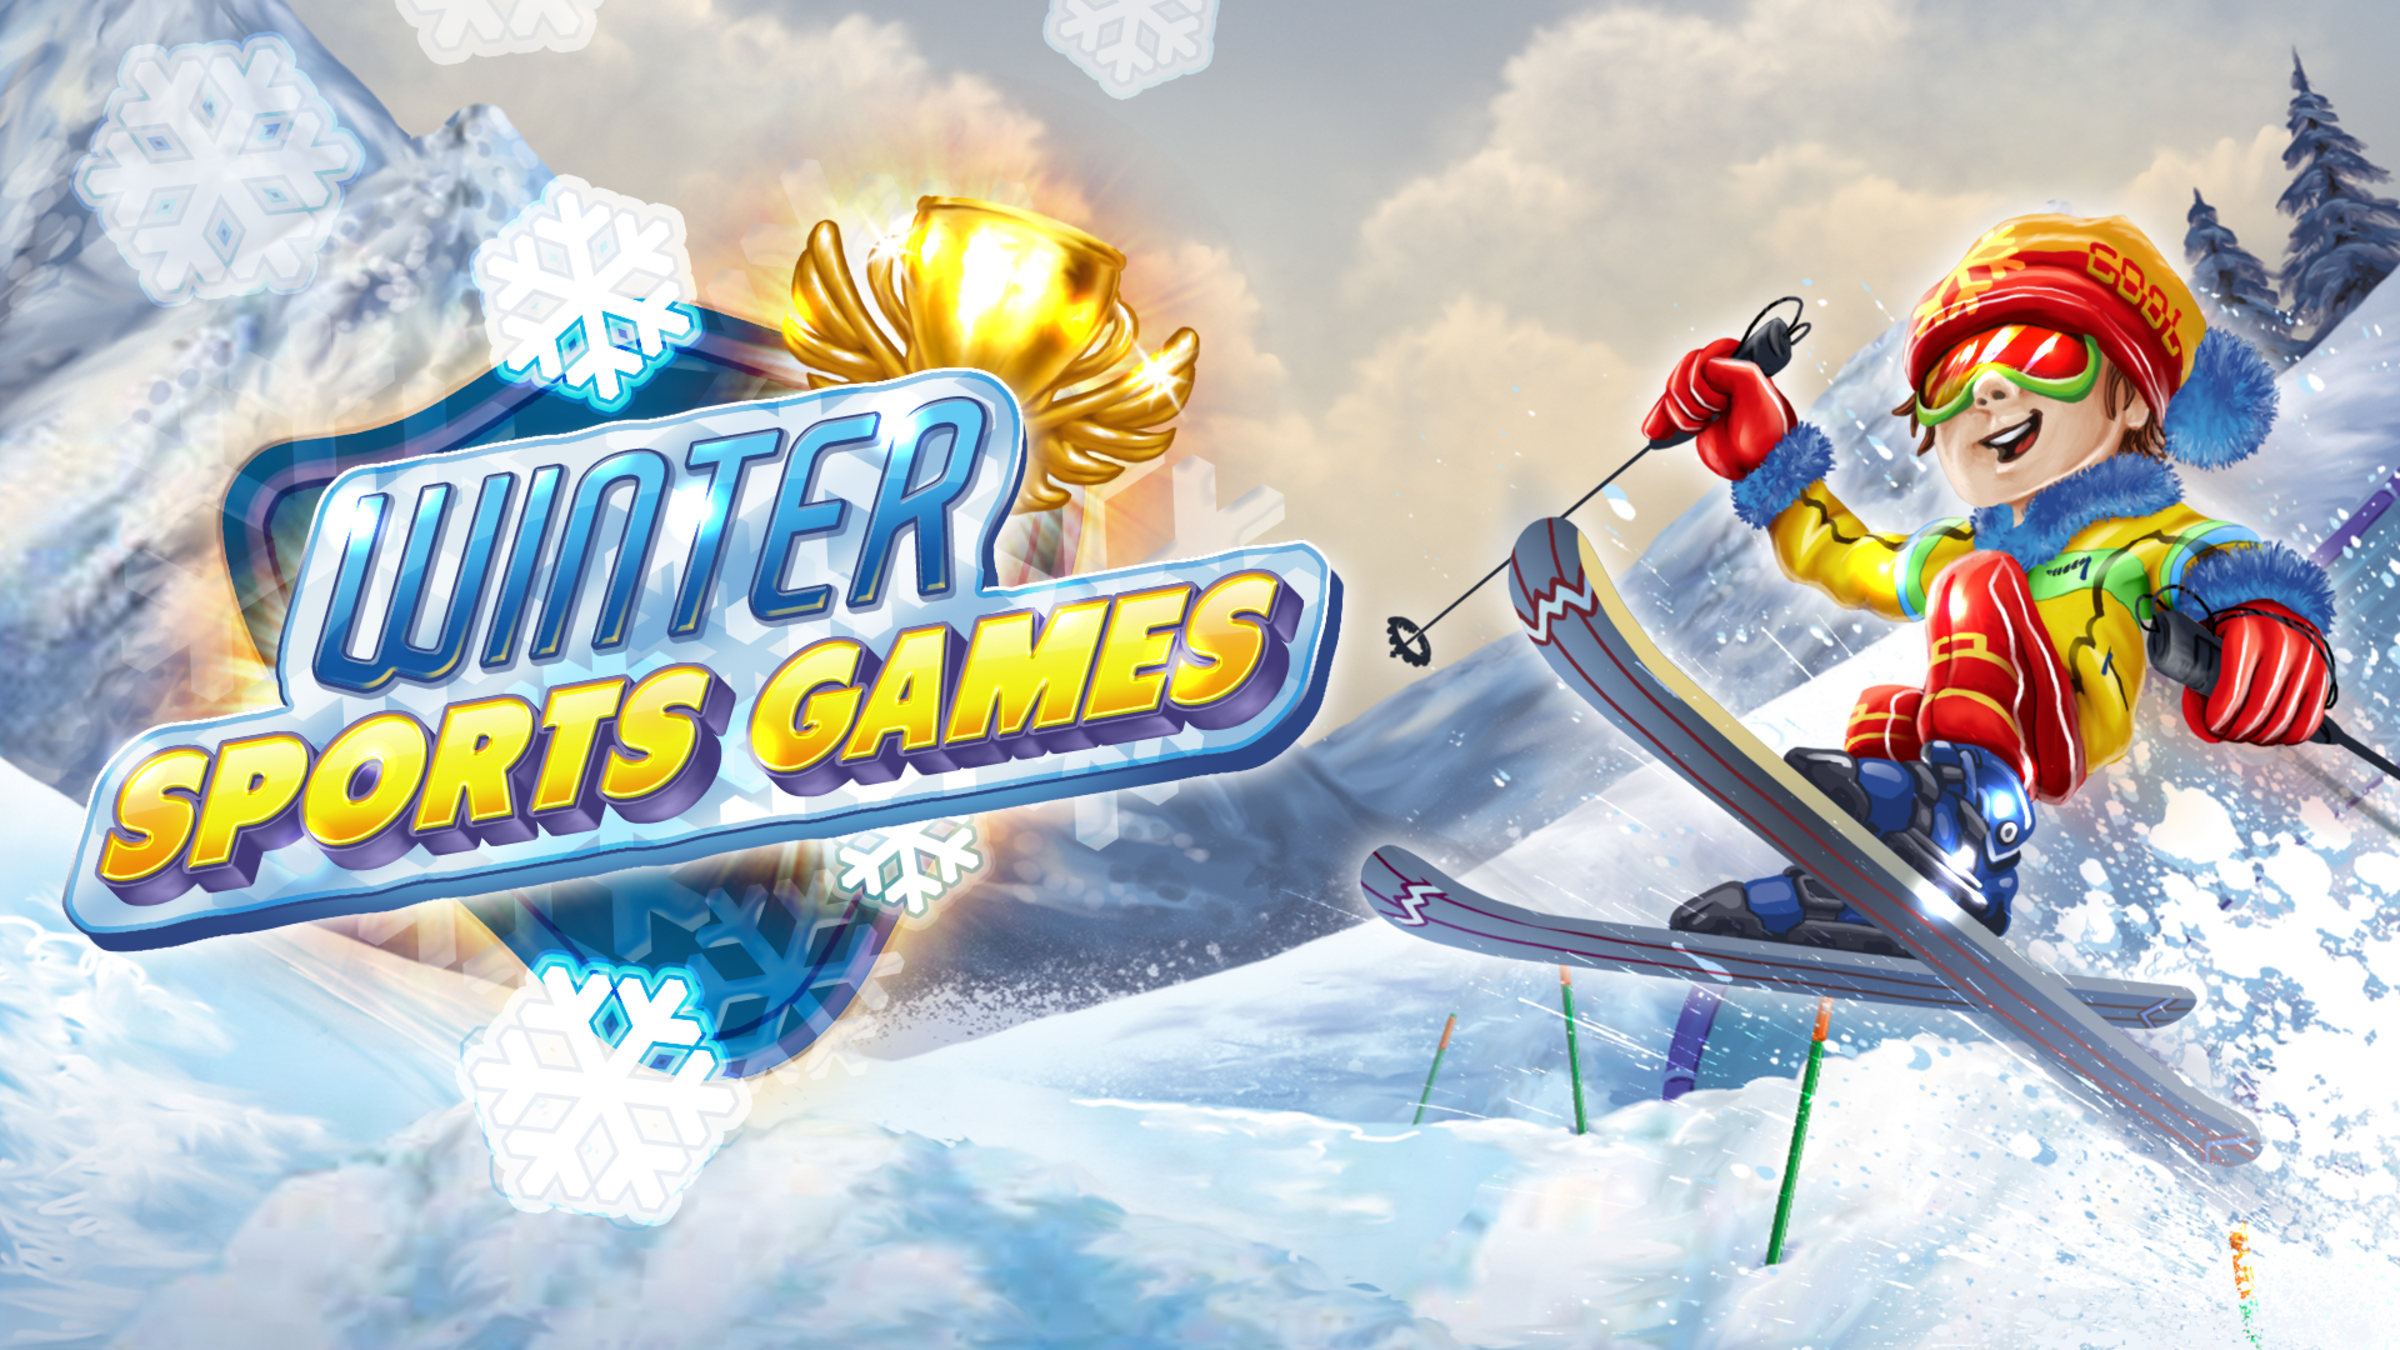 Winter Sports Games for Nintendo Switch